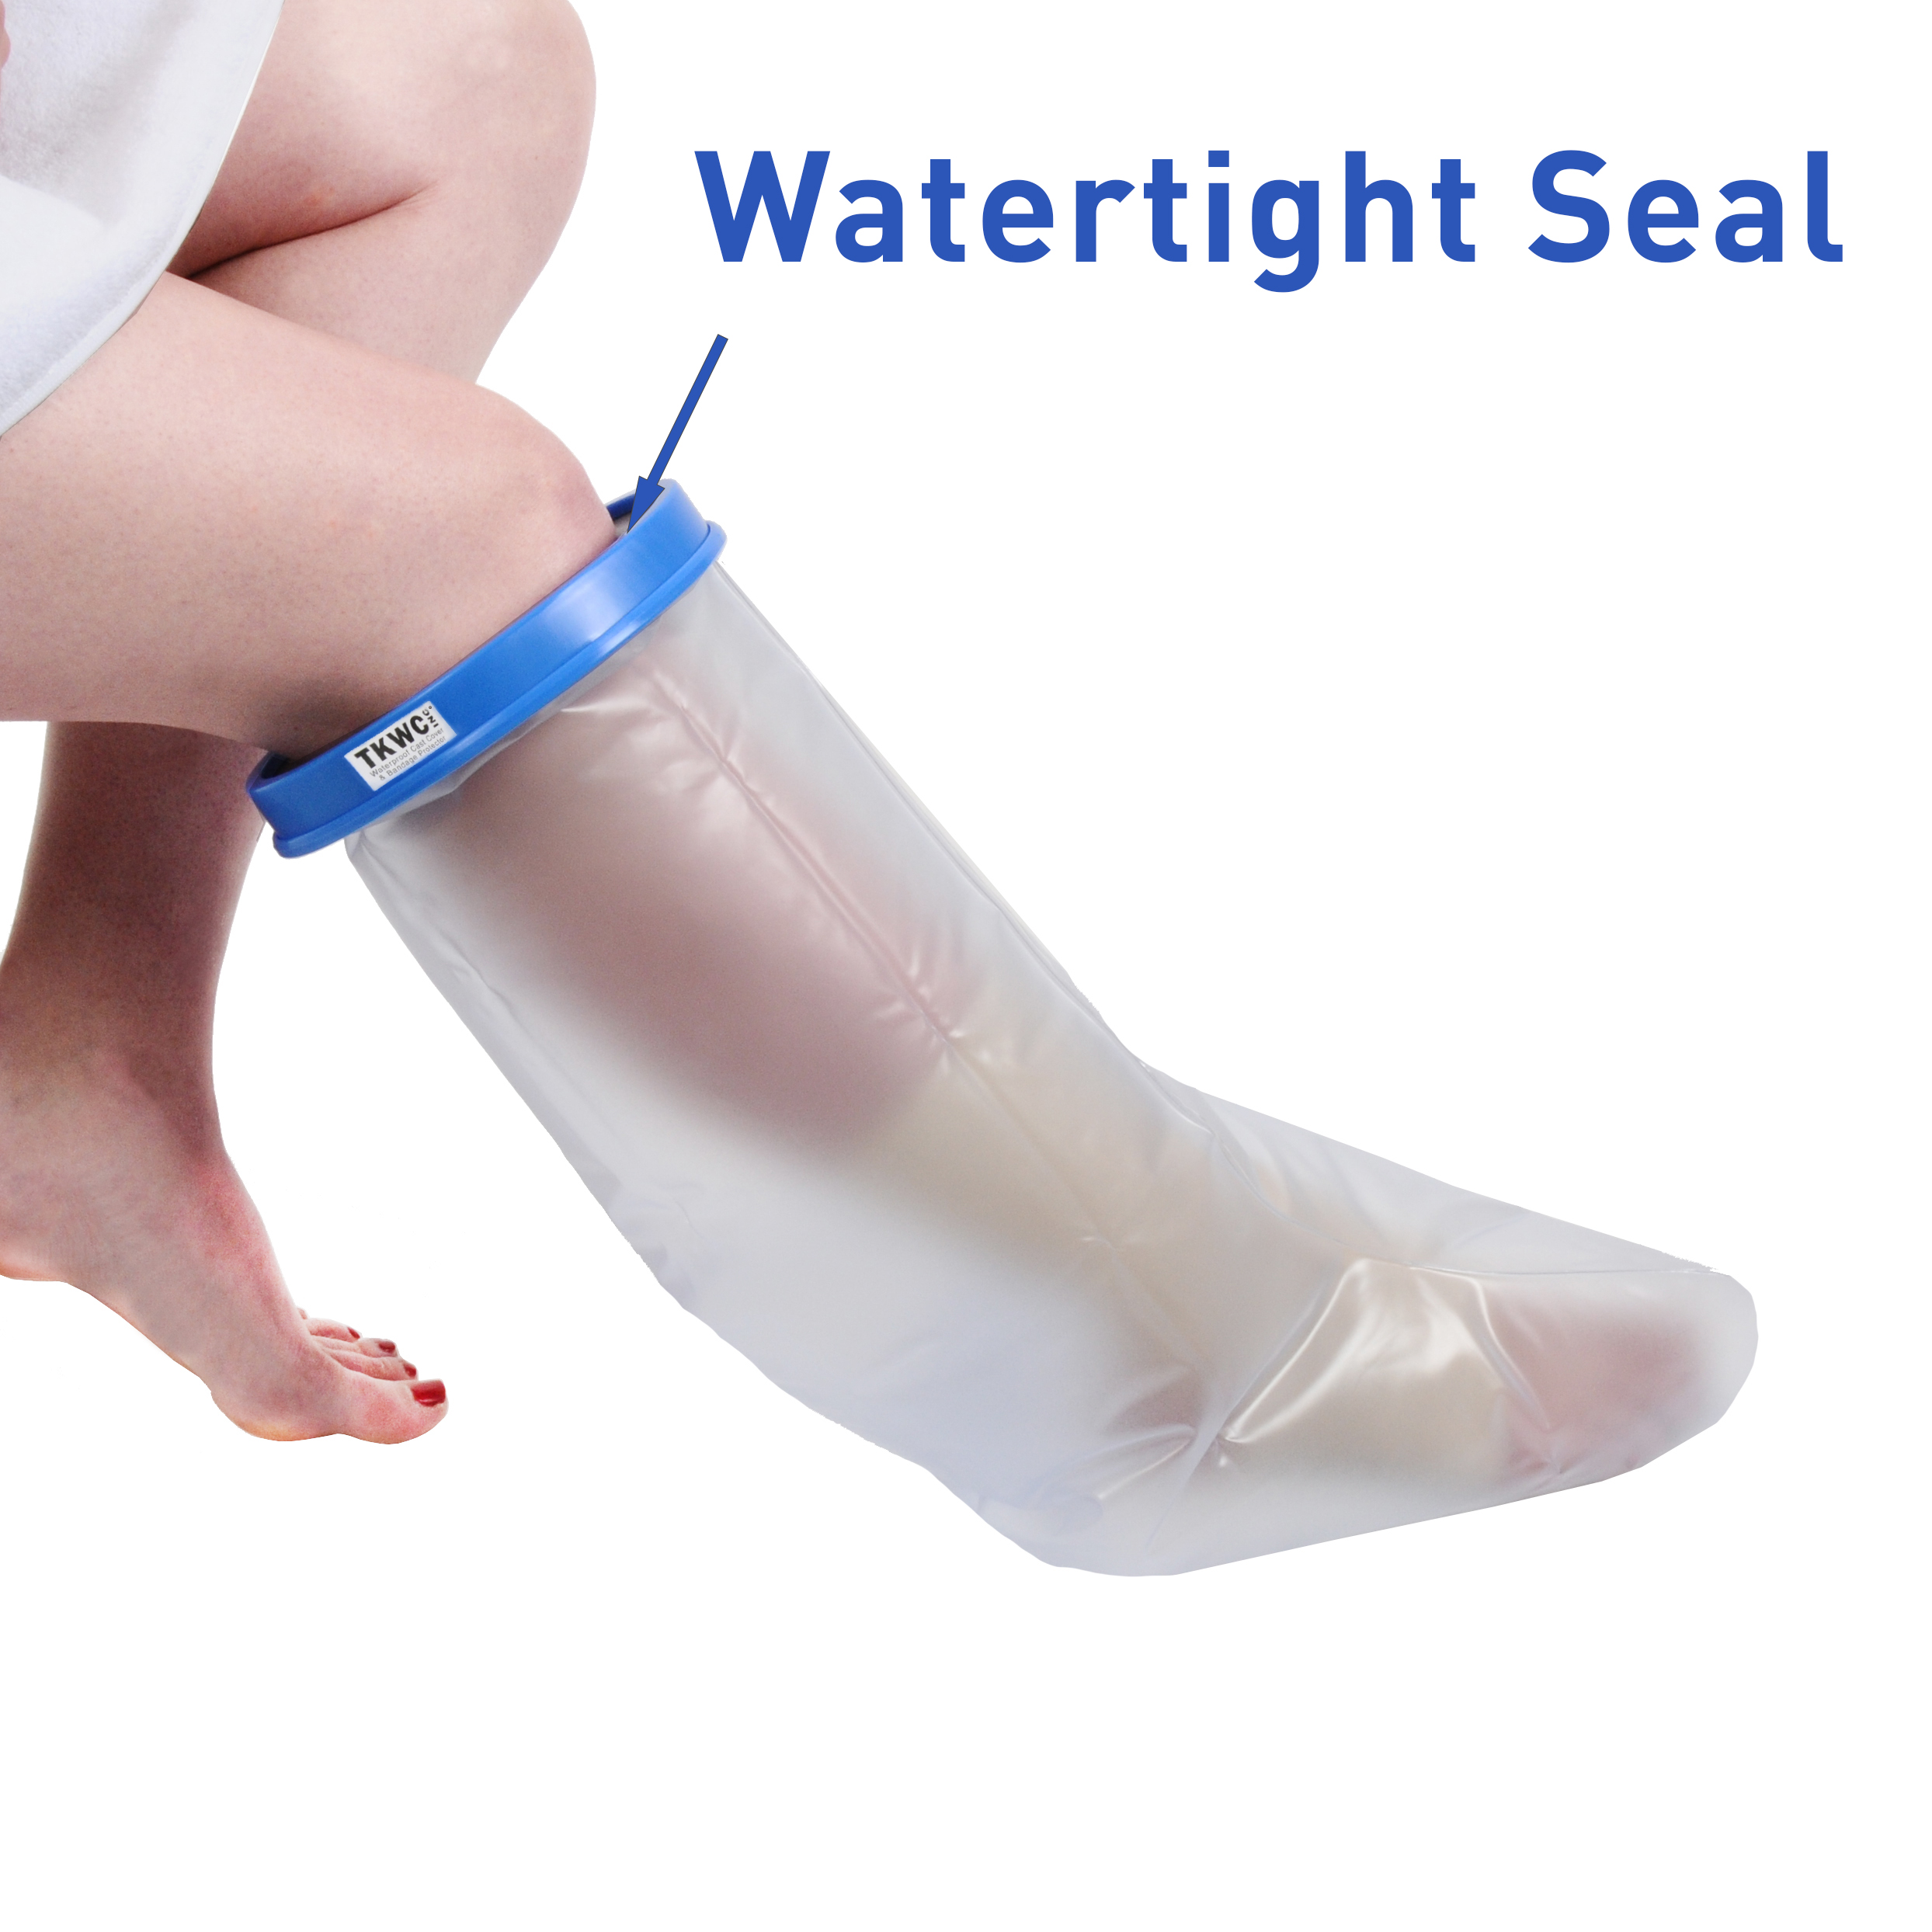 TKWC INC Waterproof Leg Cast Cover for Shower - #5738 - Watertight Foot Protector - image 2 of 6